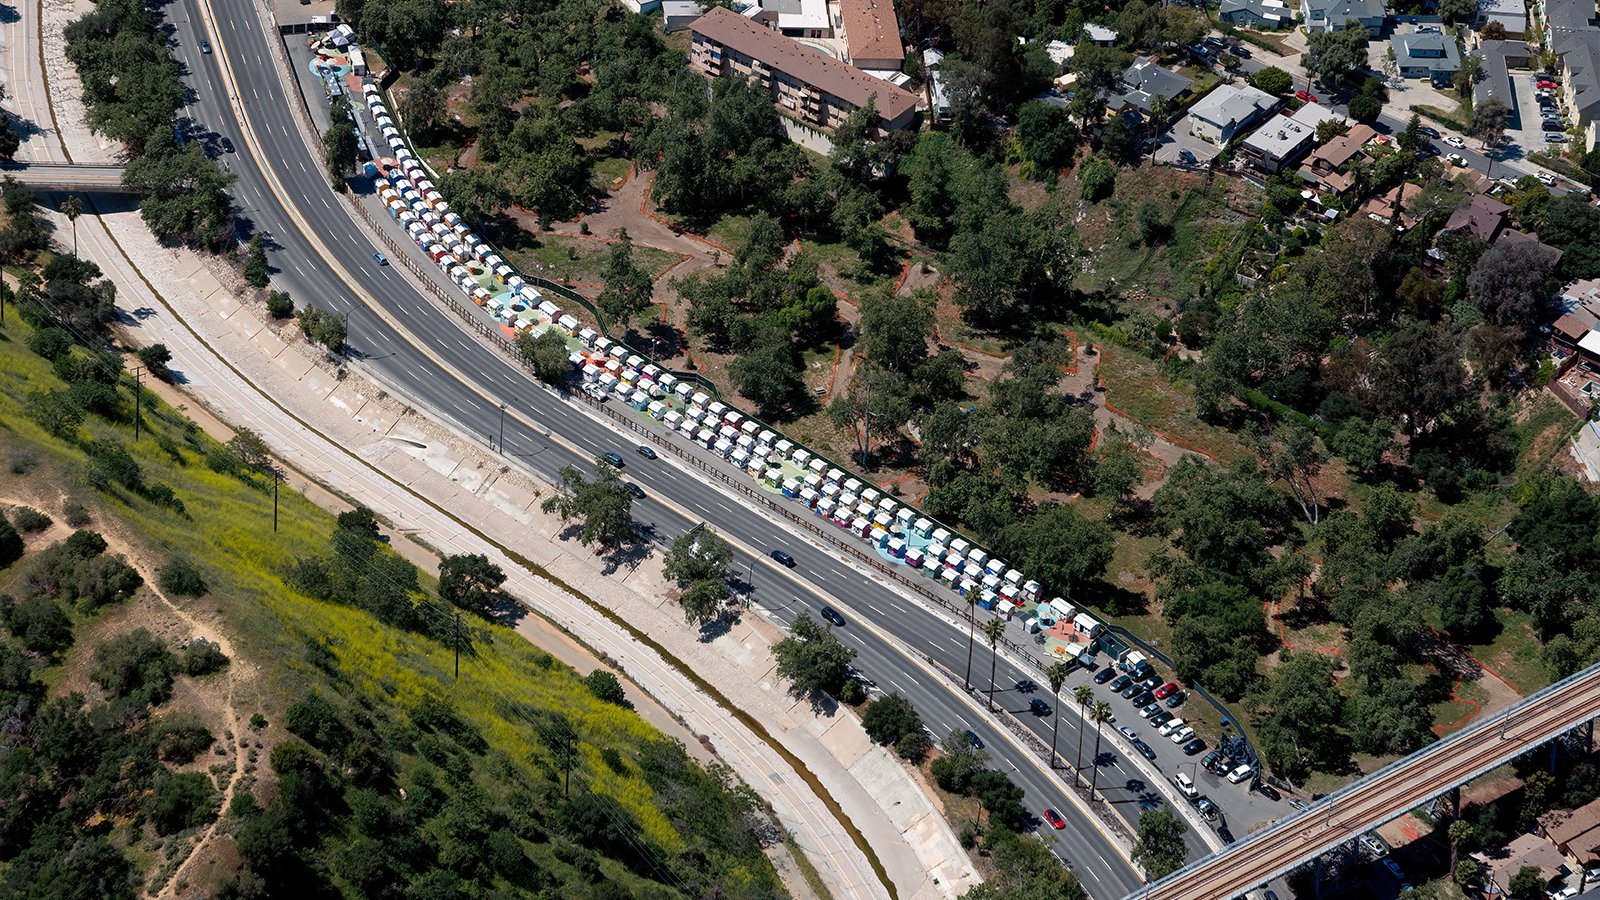 Aerial photograph of the Arroyo Seco Tiny Home Village off the 110 Freeway, in Highland Park, California